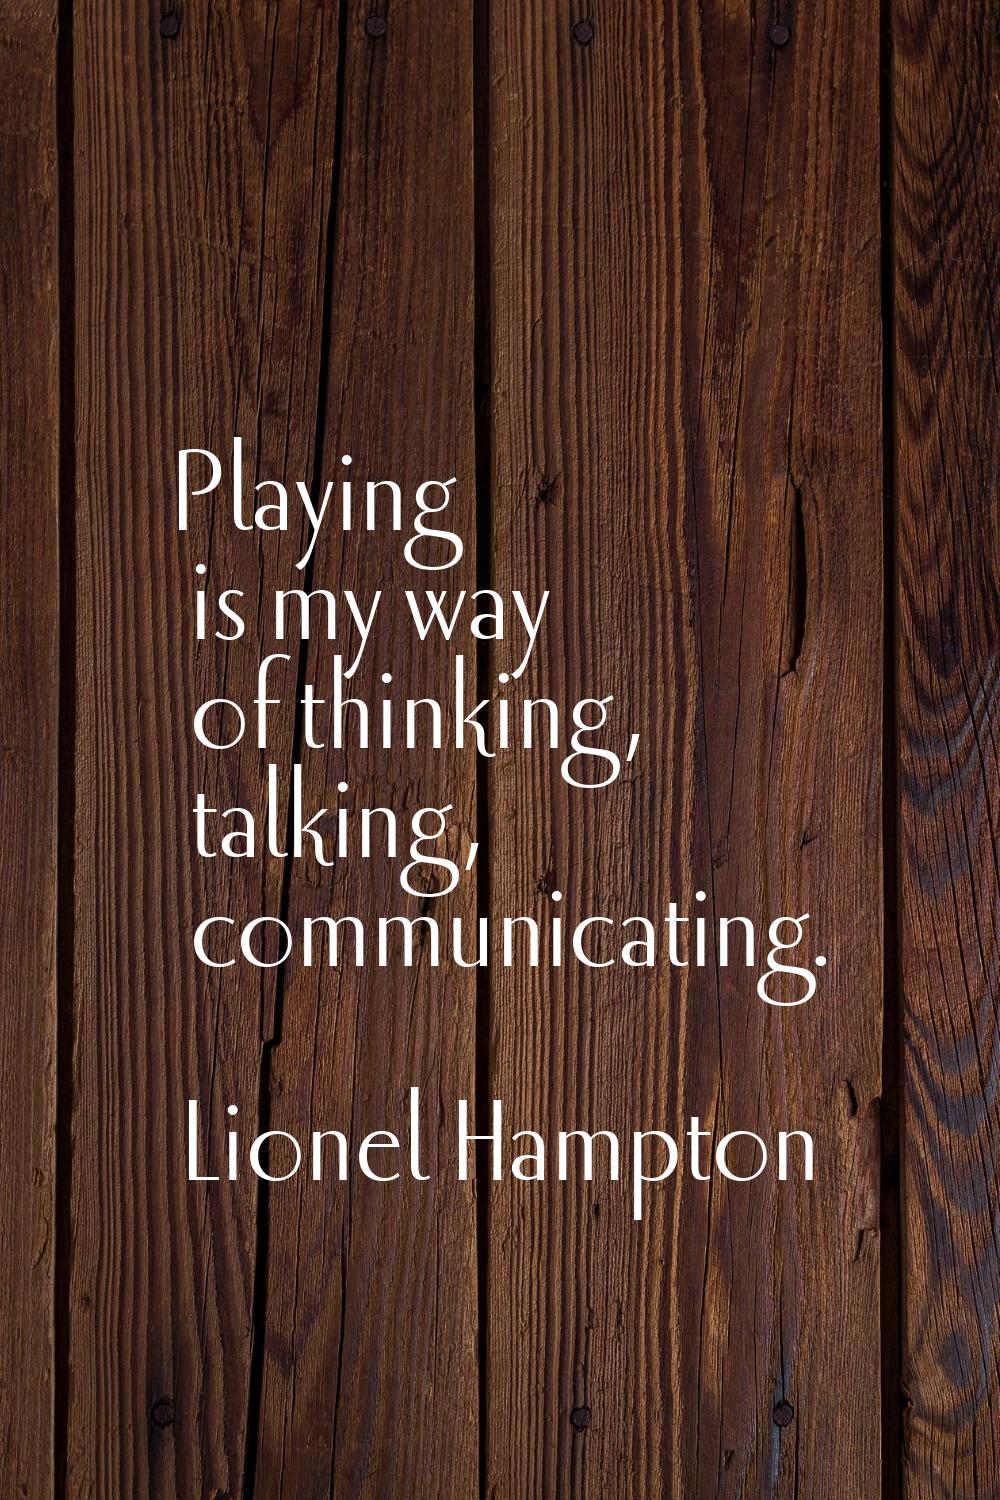 Playing is my way of thinking, talking, communicating.